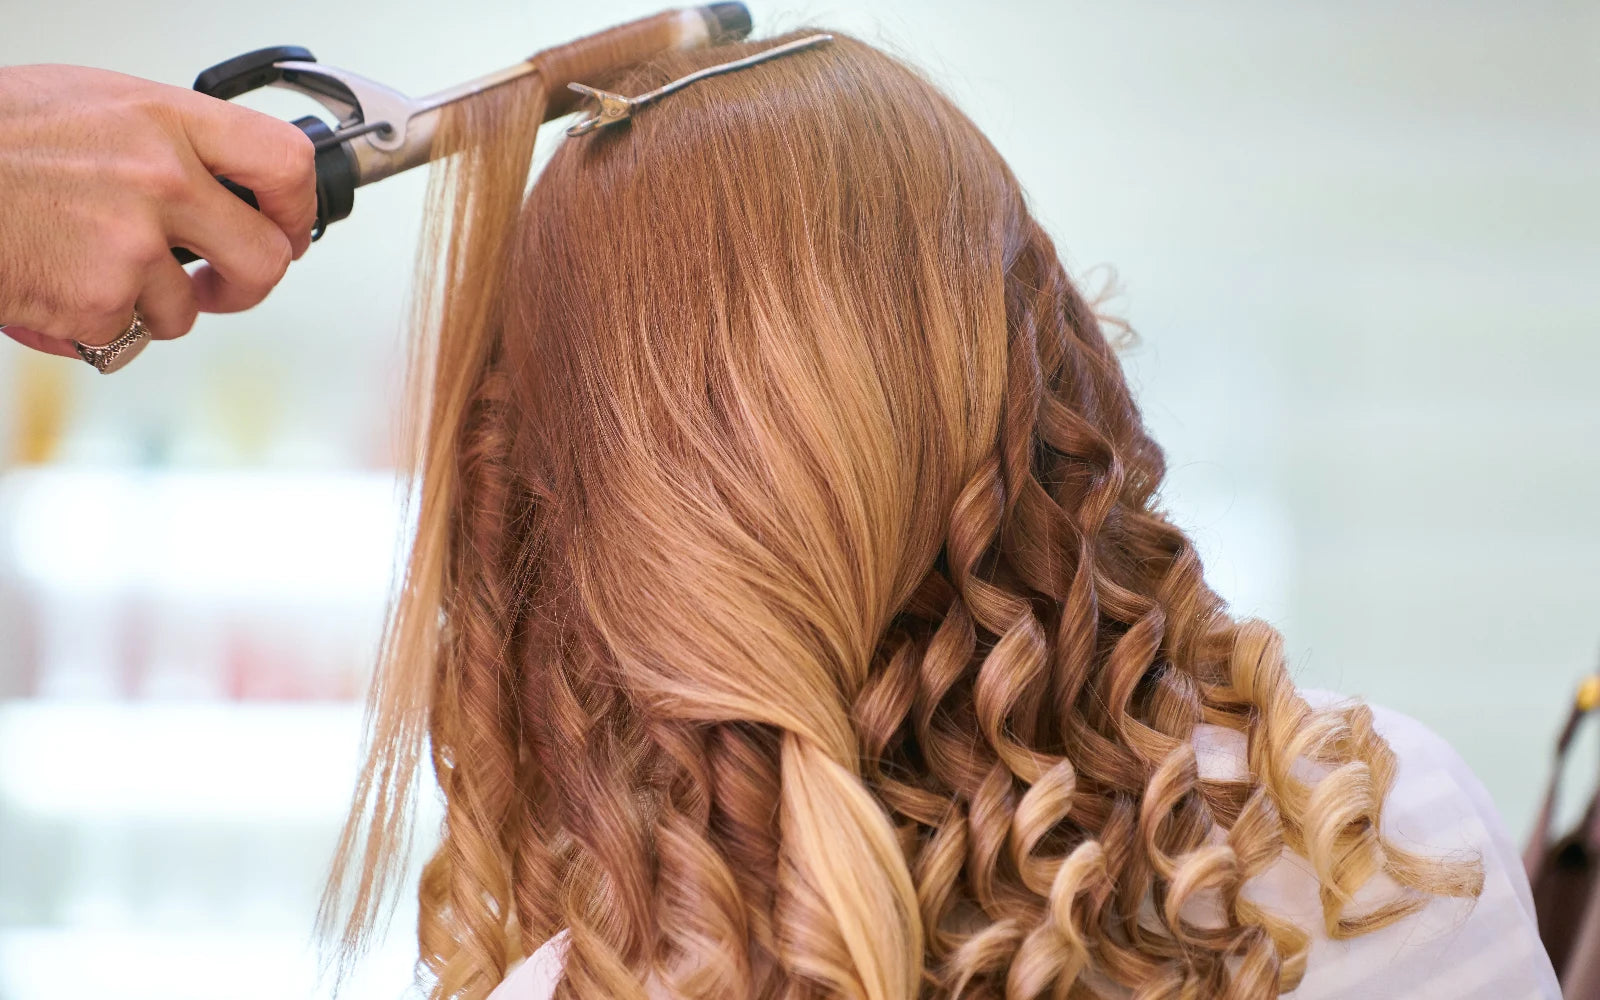 How to curl hair with a curling iron or a wand